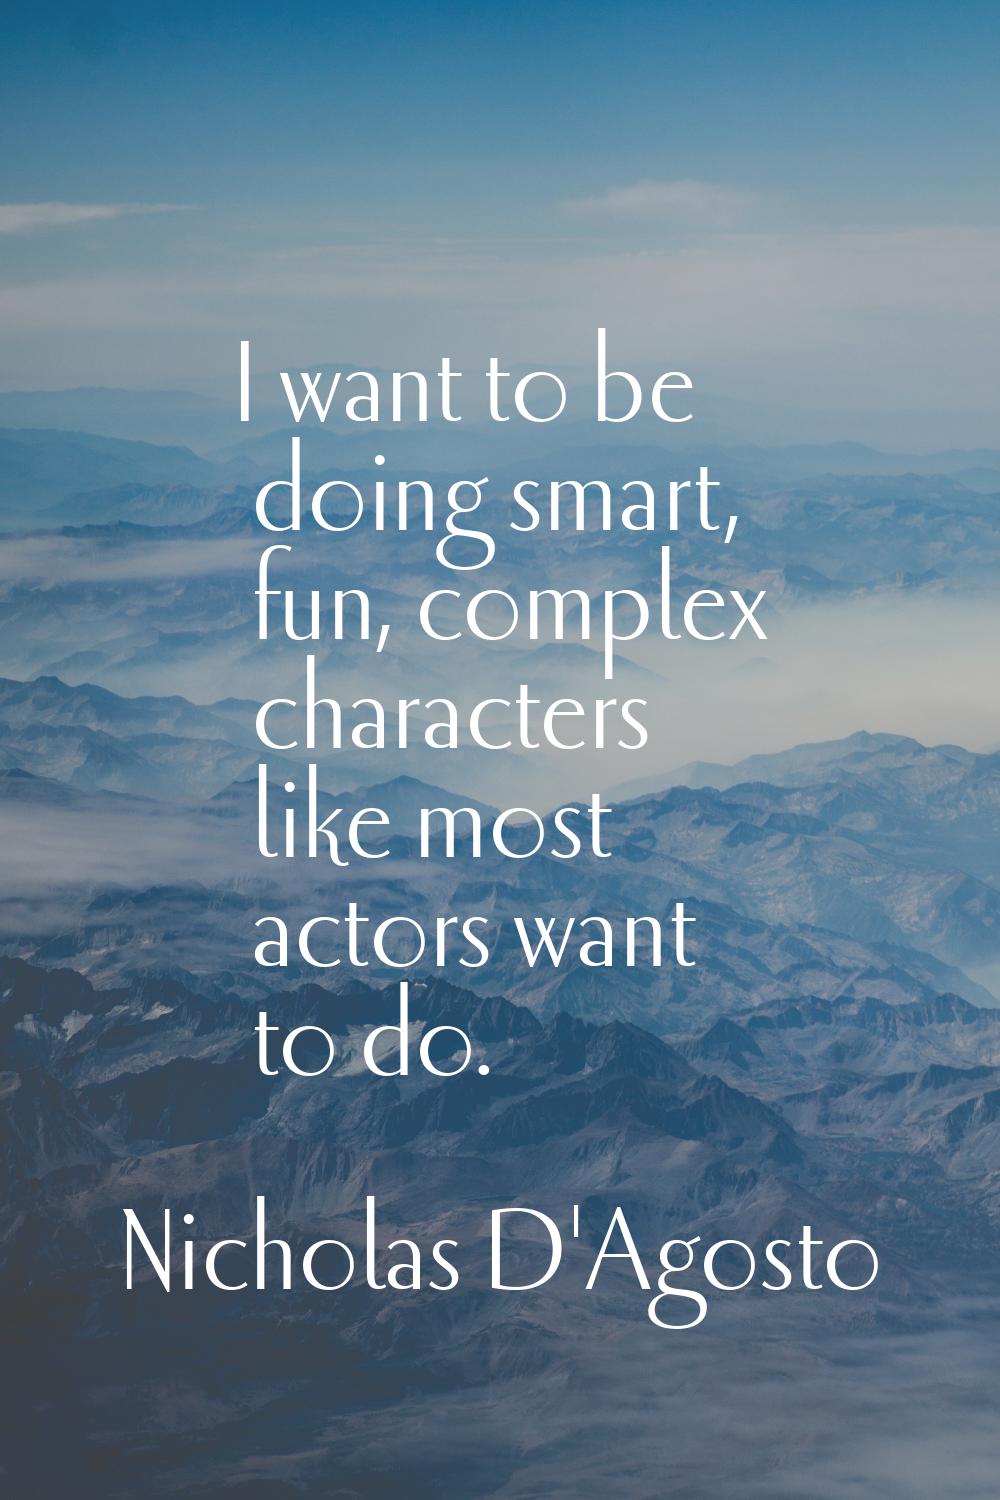 I want to be doing smart, fun, complex characters like most actors want to do.